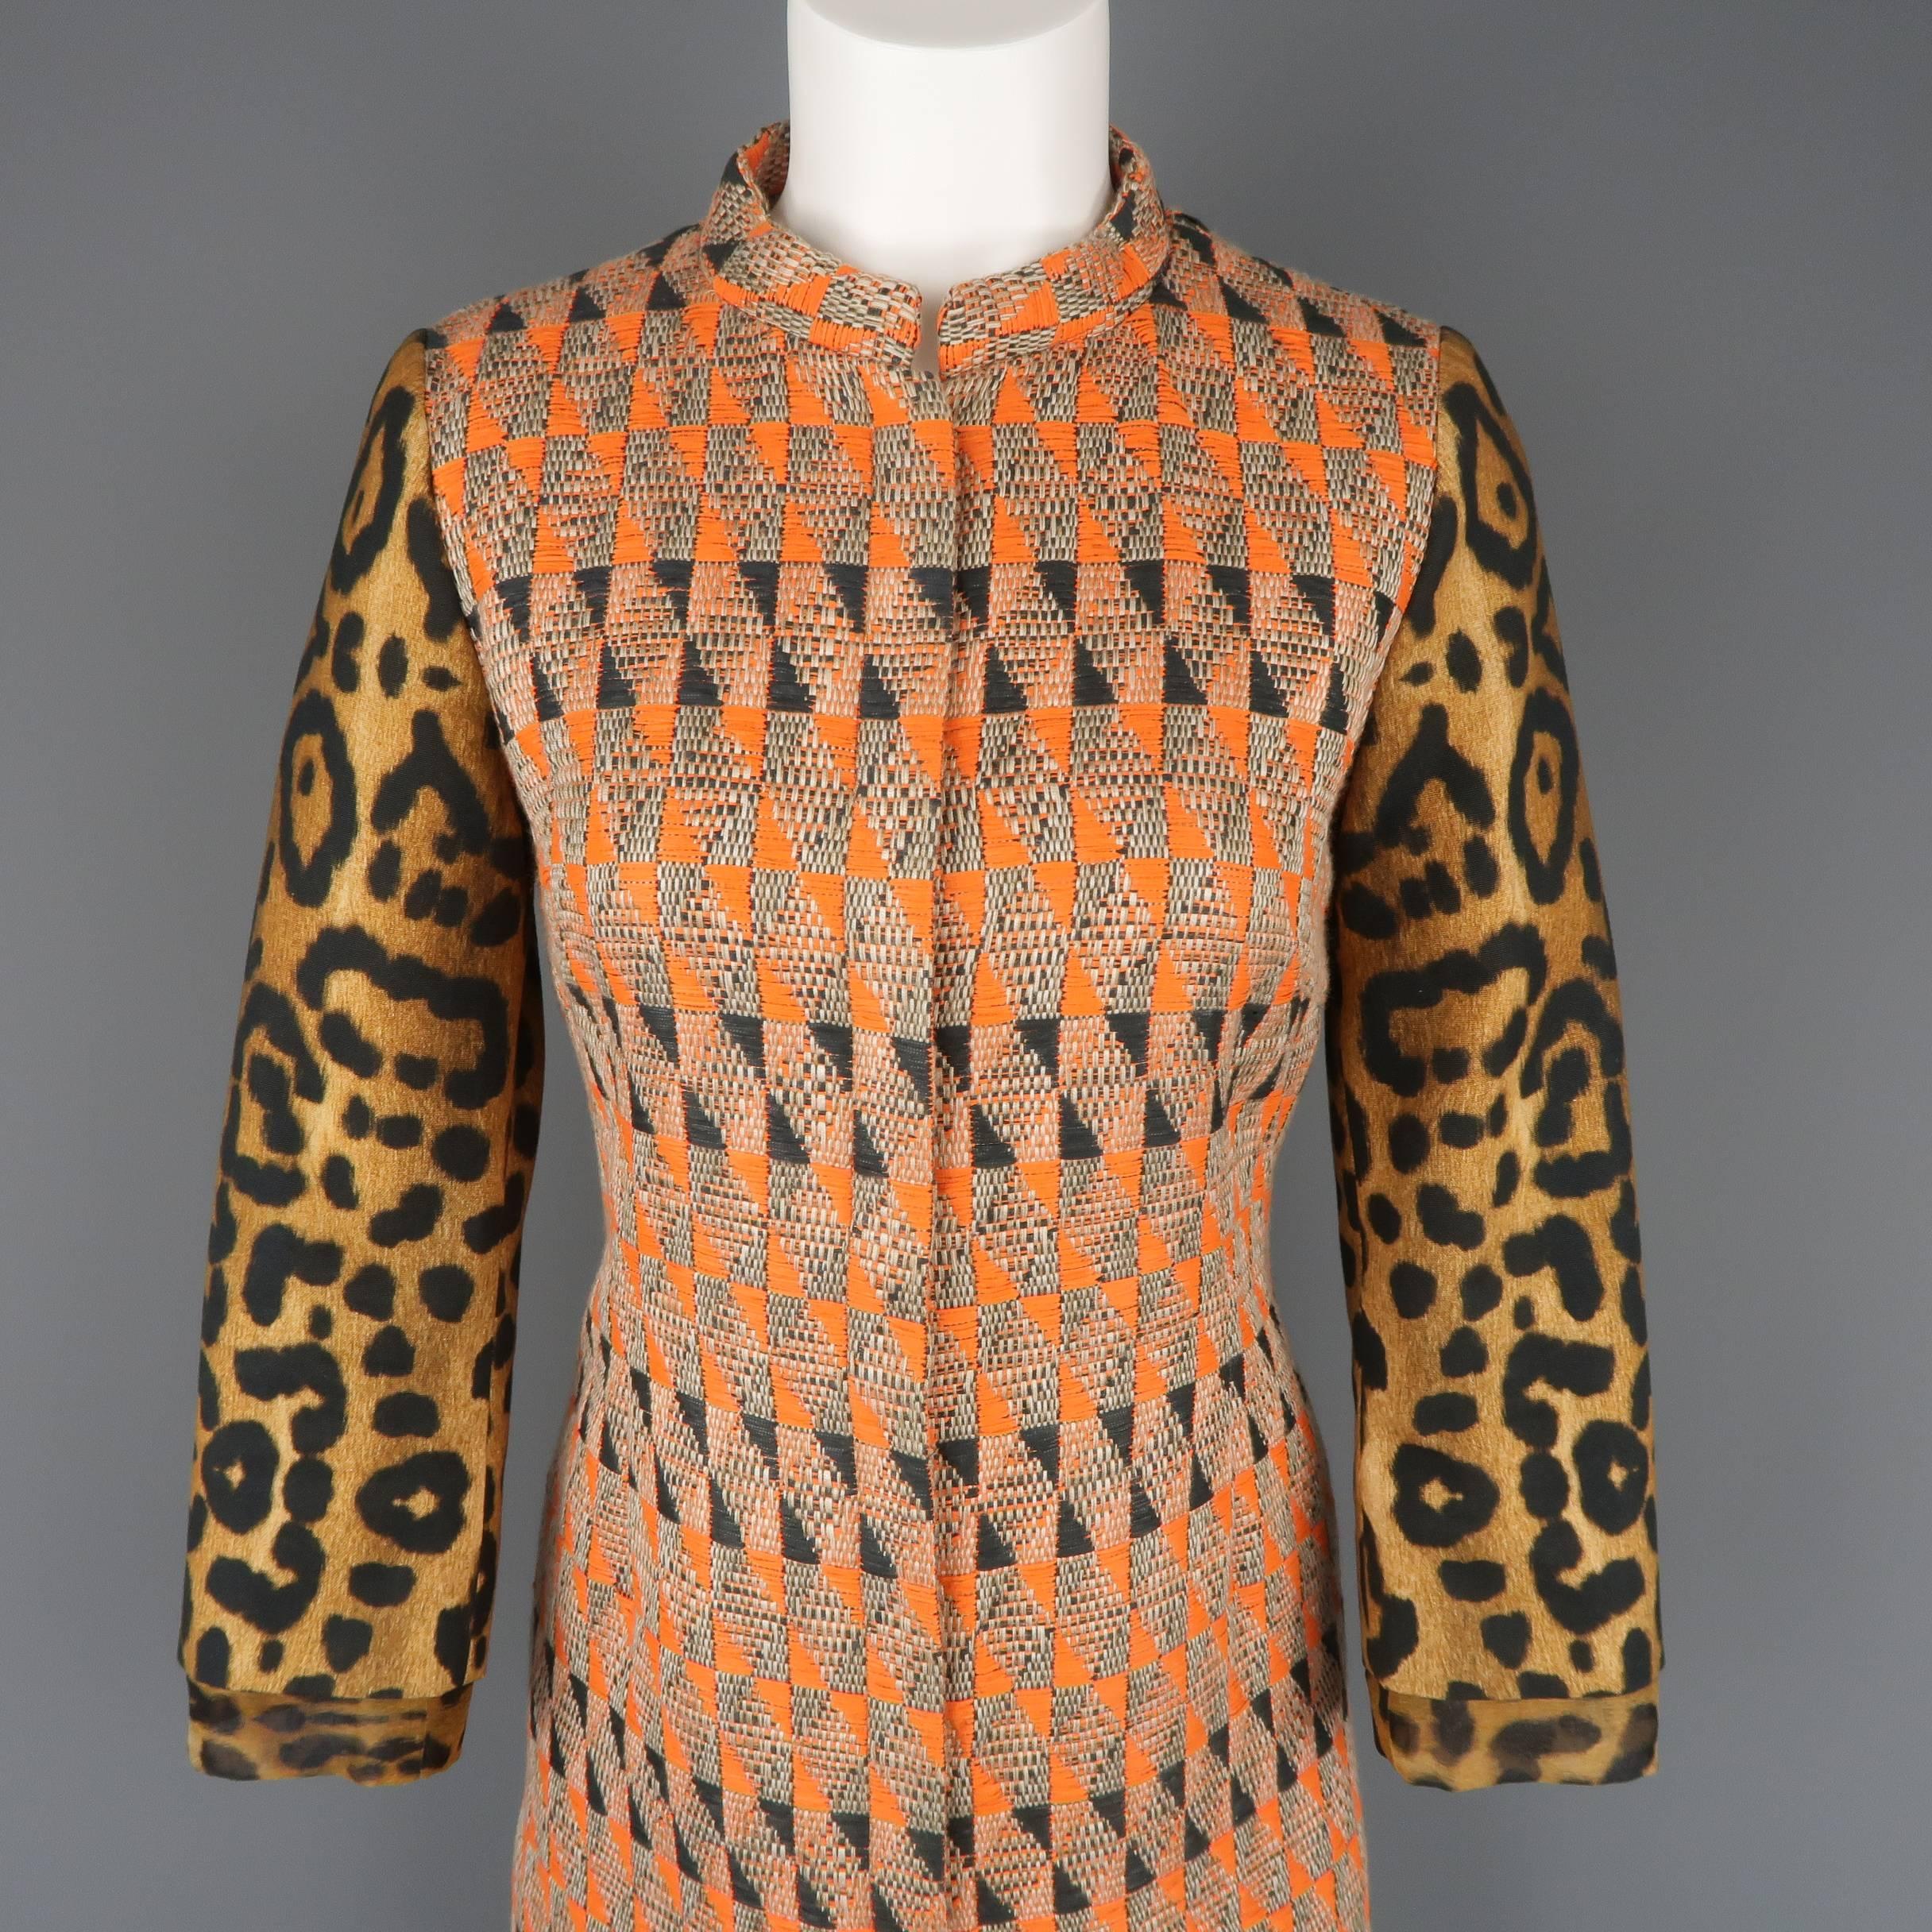 Giambattista Valli  cocktail dress features in an orange and tan geometric print body, band collar, hidden placket snap closure front, leopard print sleeves, and coral and clear rhinestone beaded trim with white ostrich feather hem. This piece is a